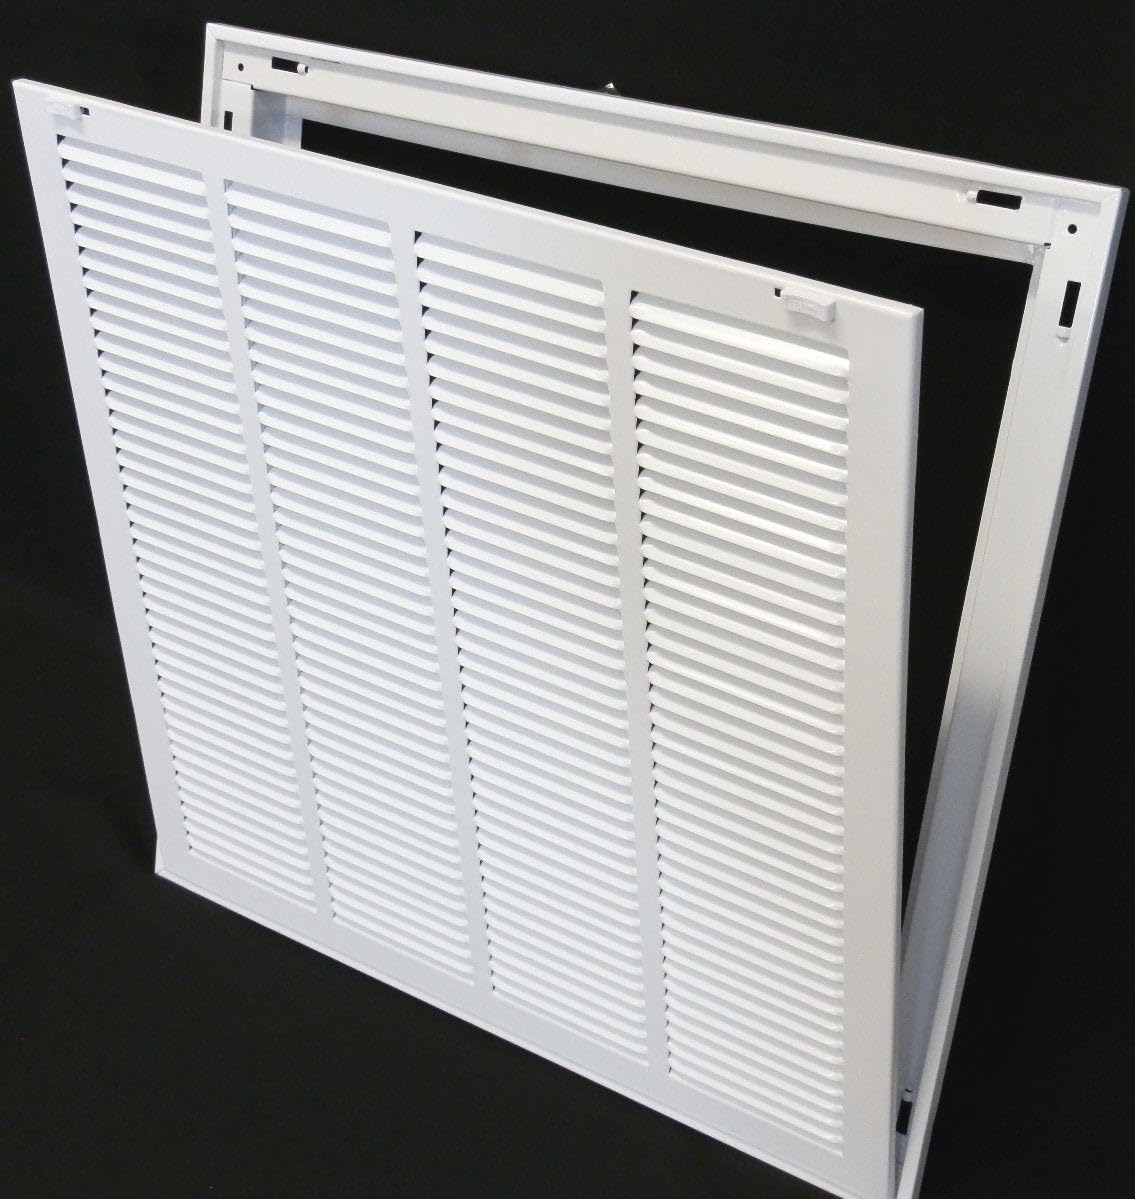 25&quot; X 20&quot; Steel Return Air Filter Grille for 1&quot; Filter - Removable Frame - [Outer Dimensions: 27 5/8&quot; X 22 5/8&quot;]